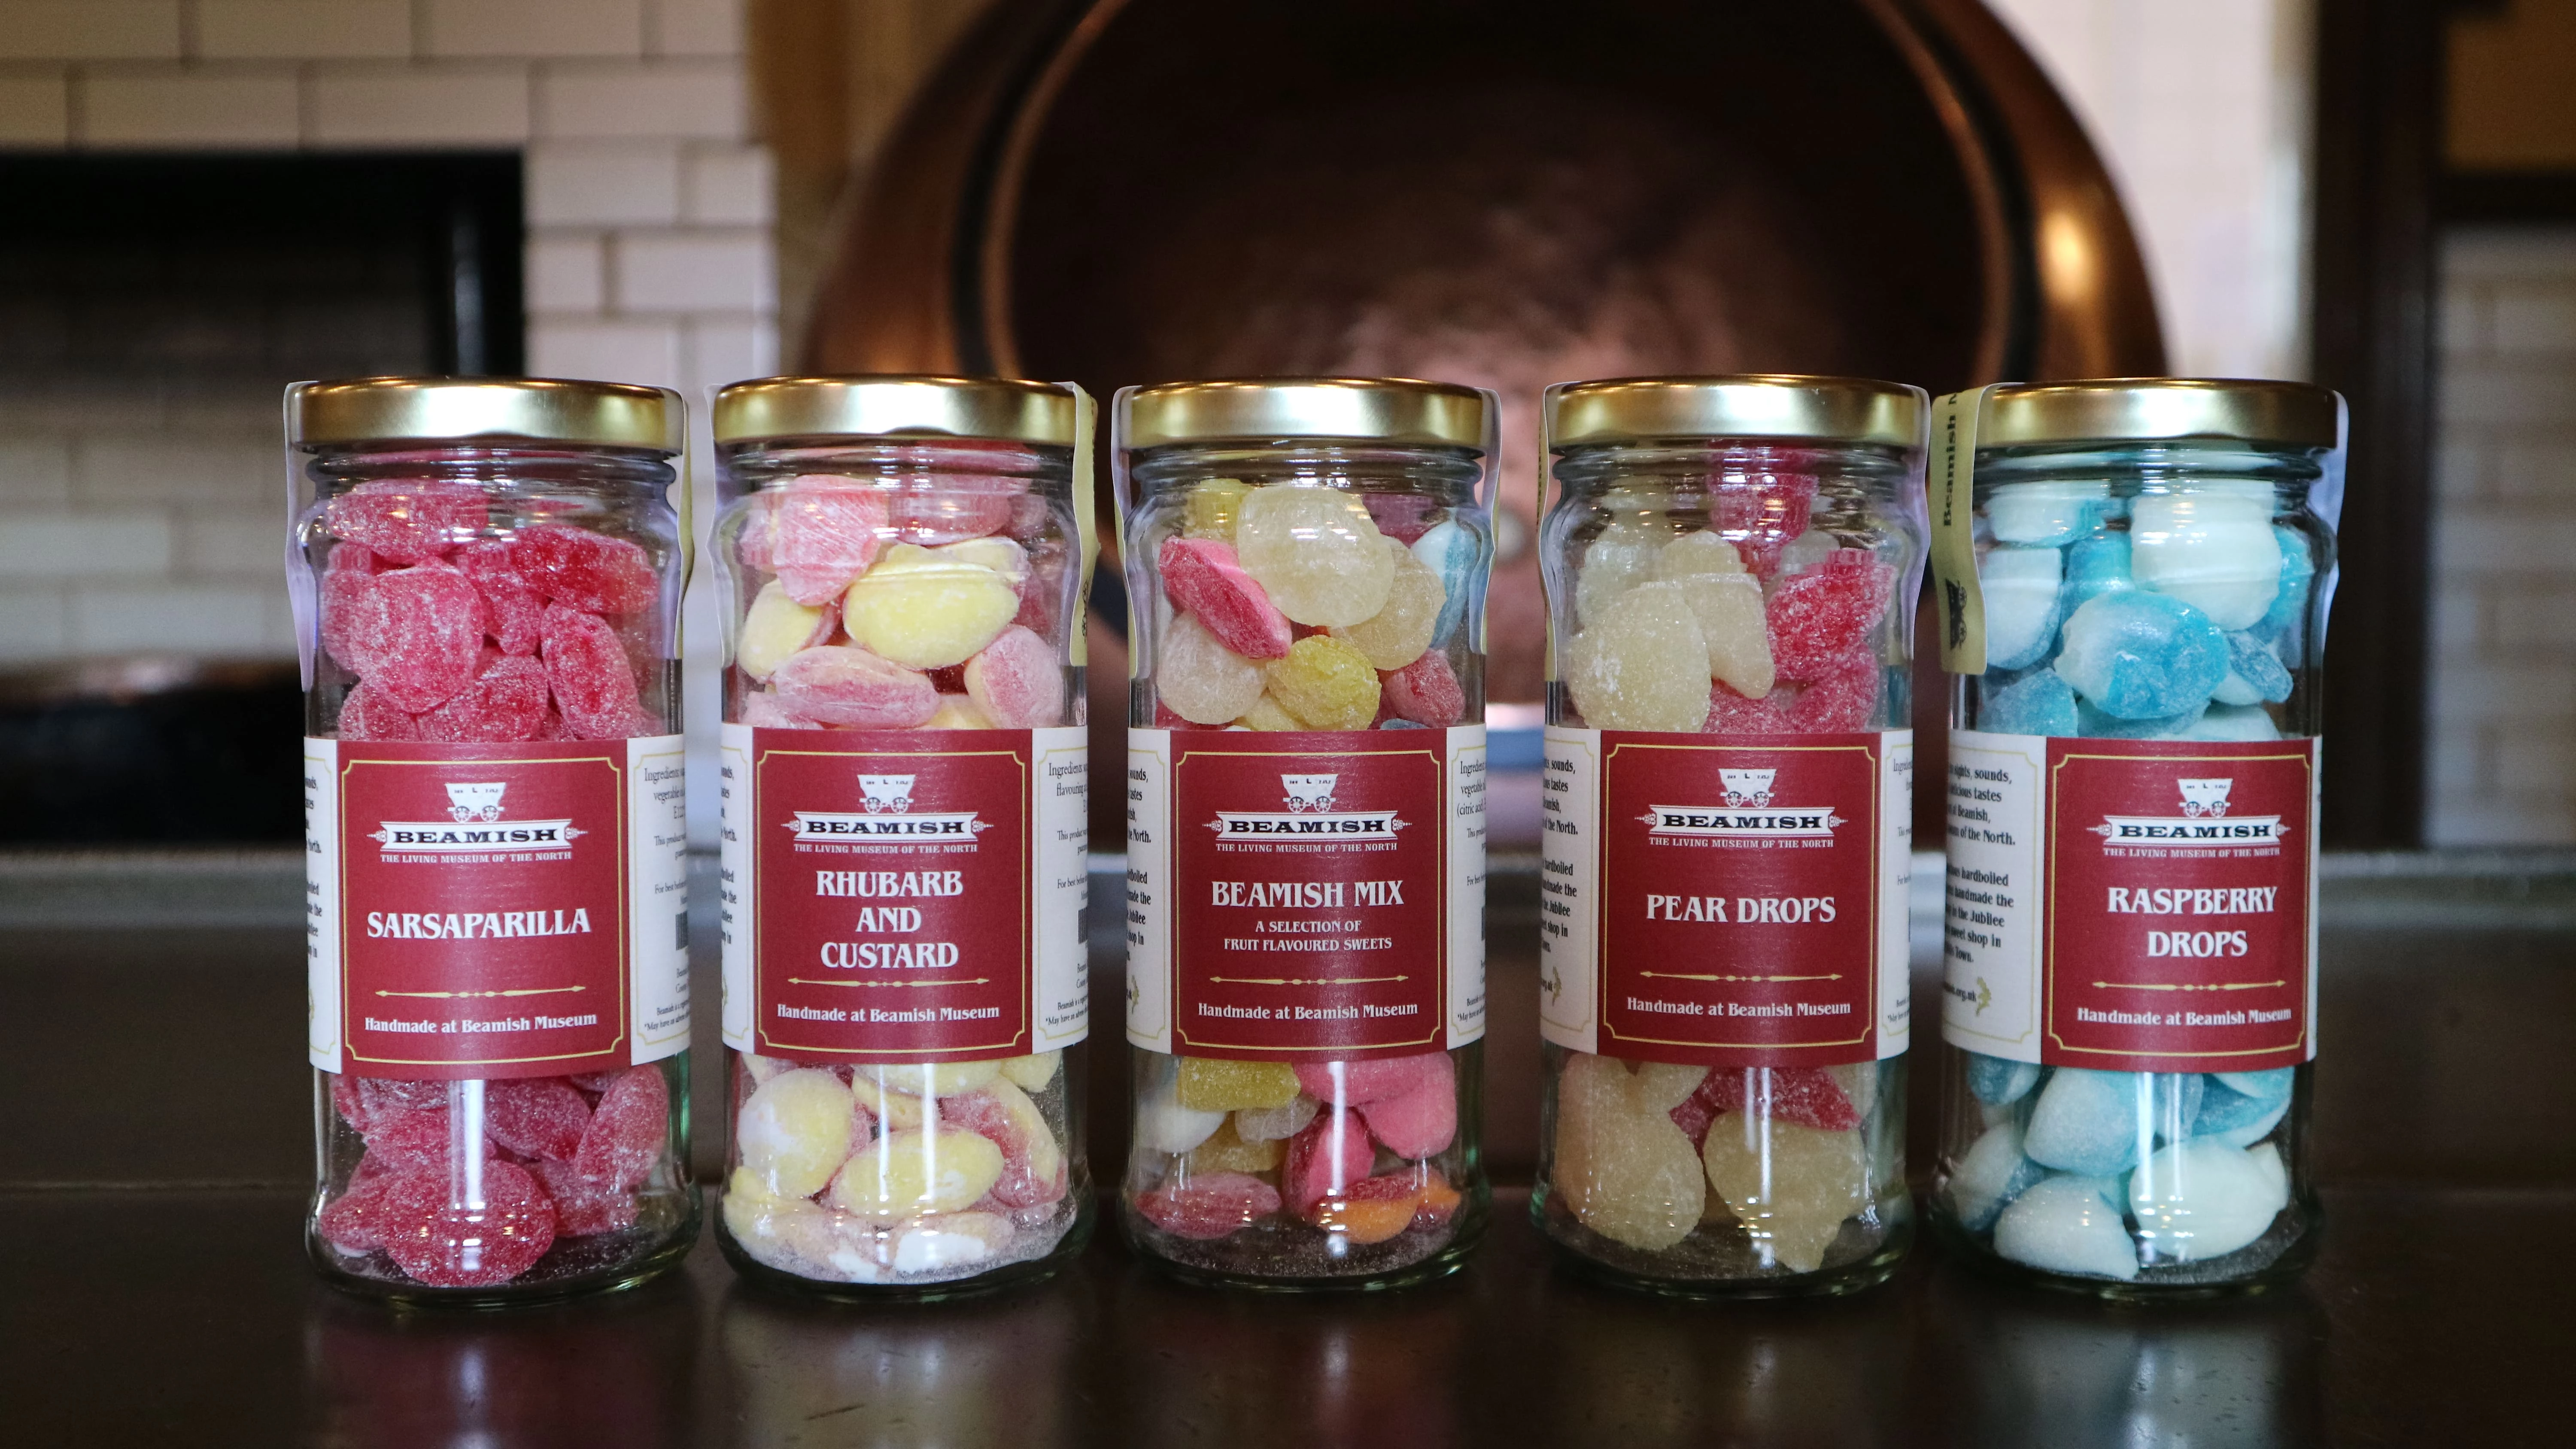 Wholesale Sweets from Beamish Museum. Image contains five jars of hard boiled sweets with locally-printed Beamish Museum branded labelling, inspired by the Beamish collections.